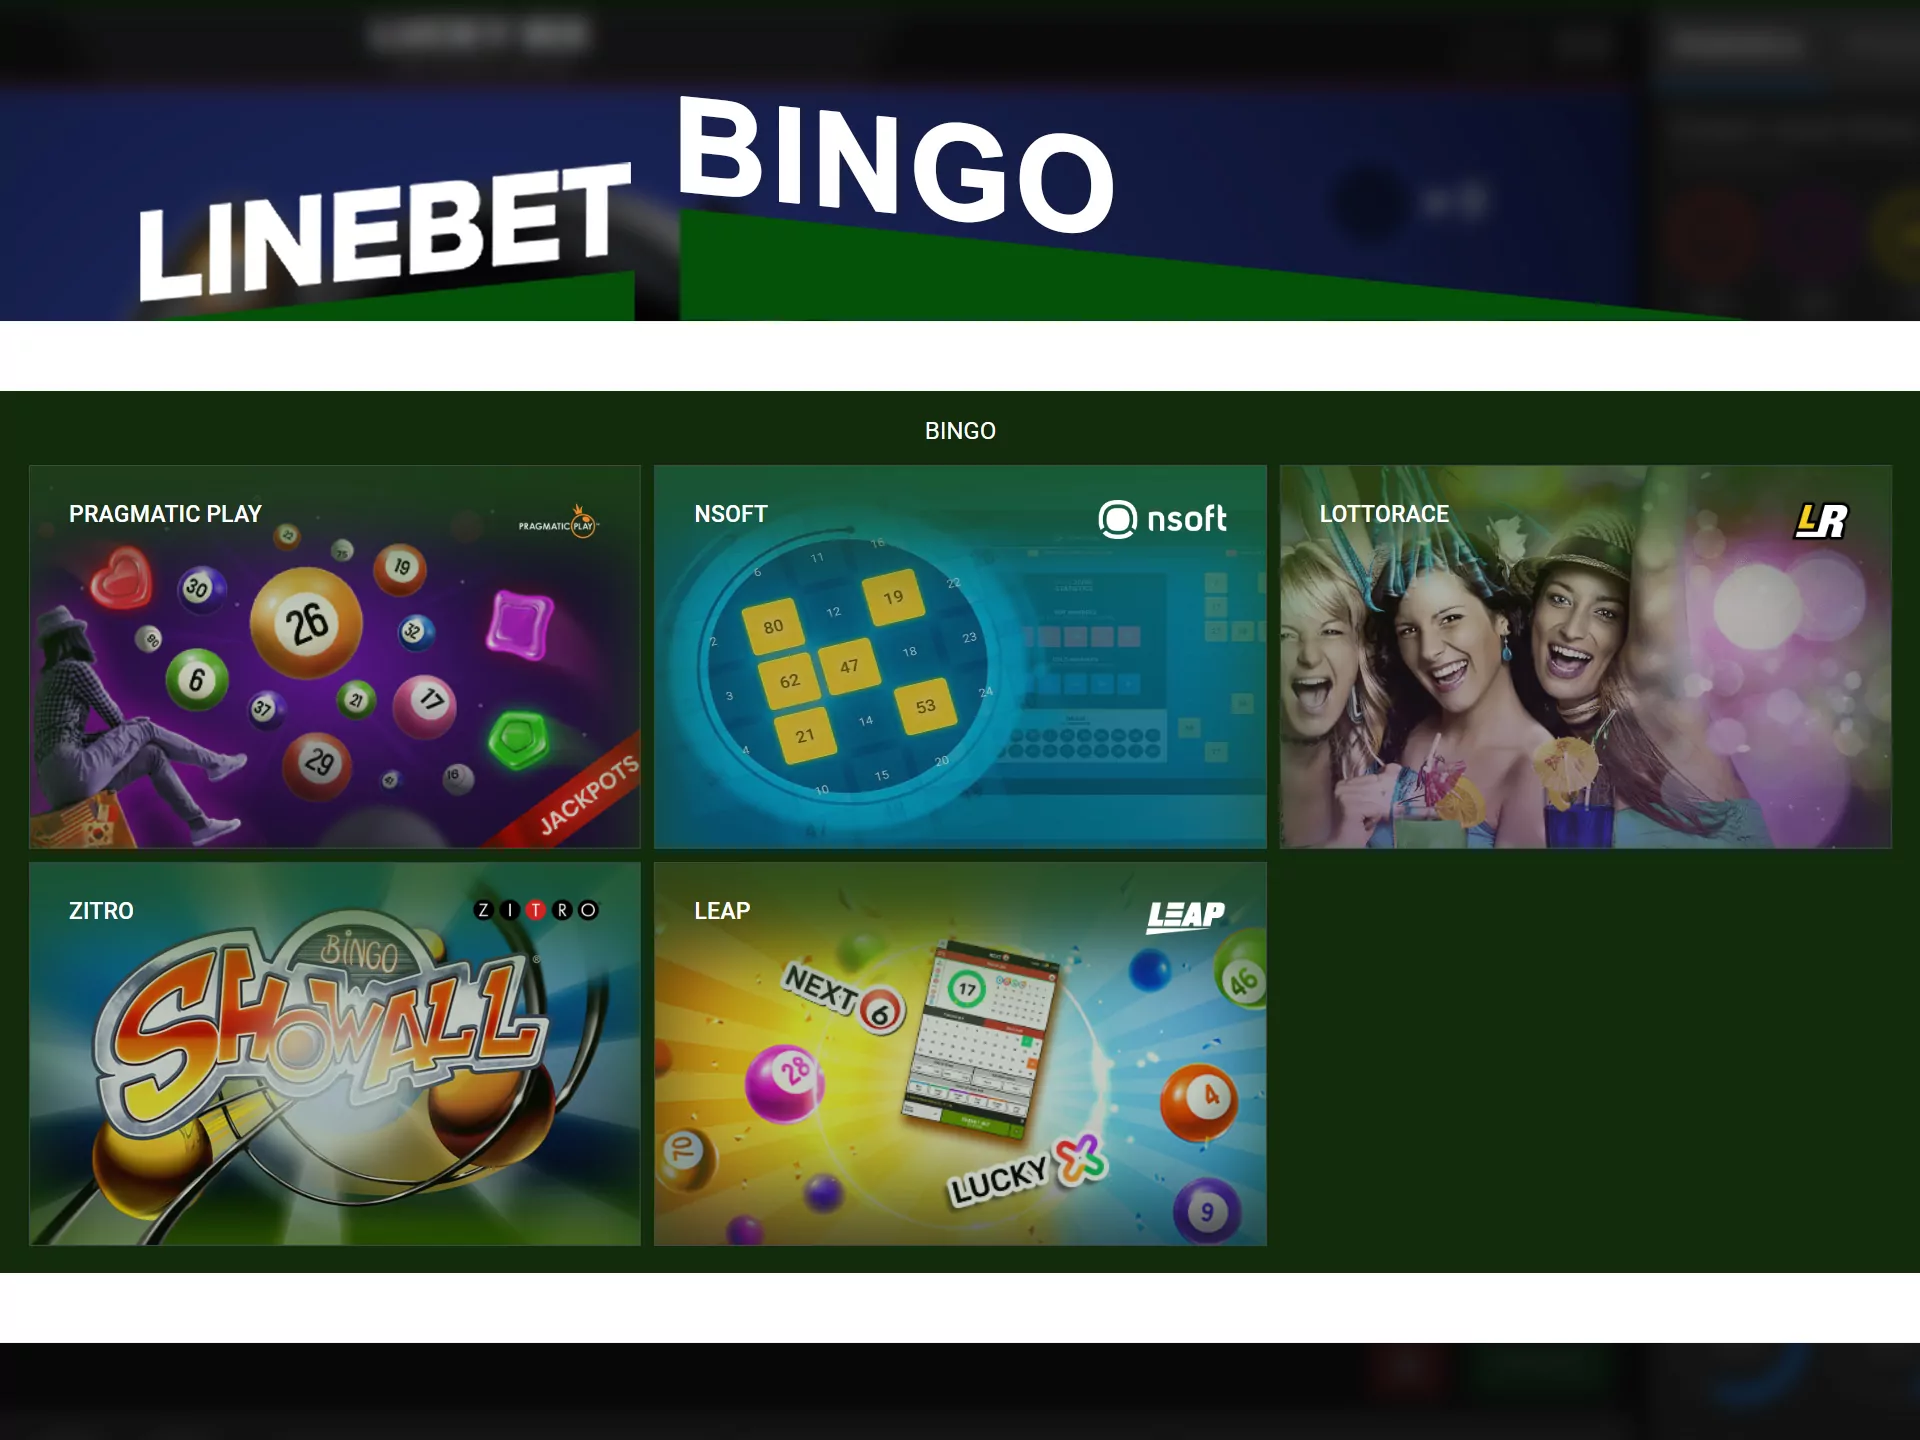 Check all numbers and win at Linebet bingo games.